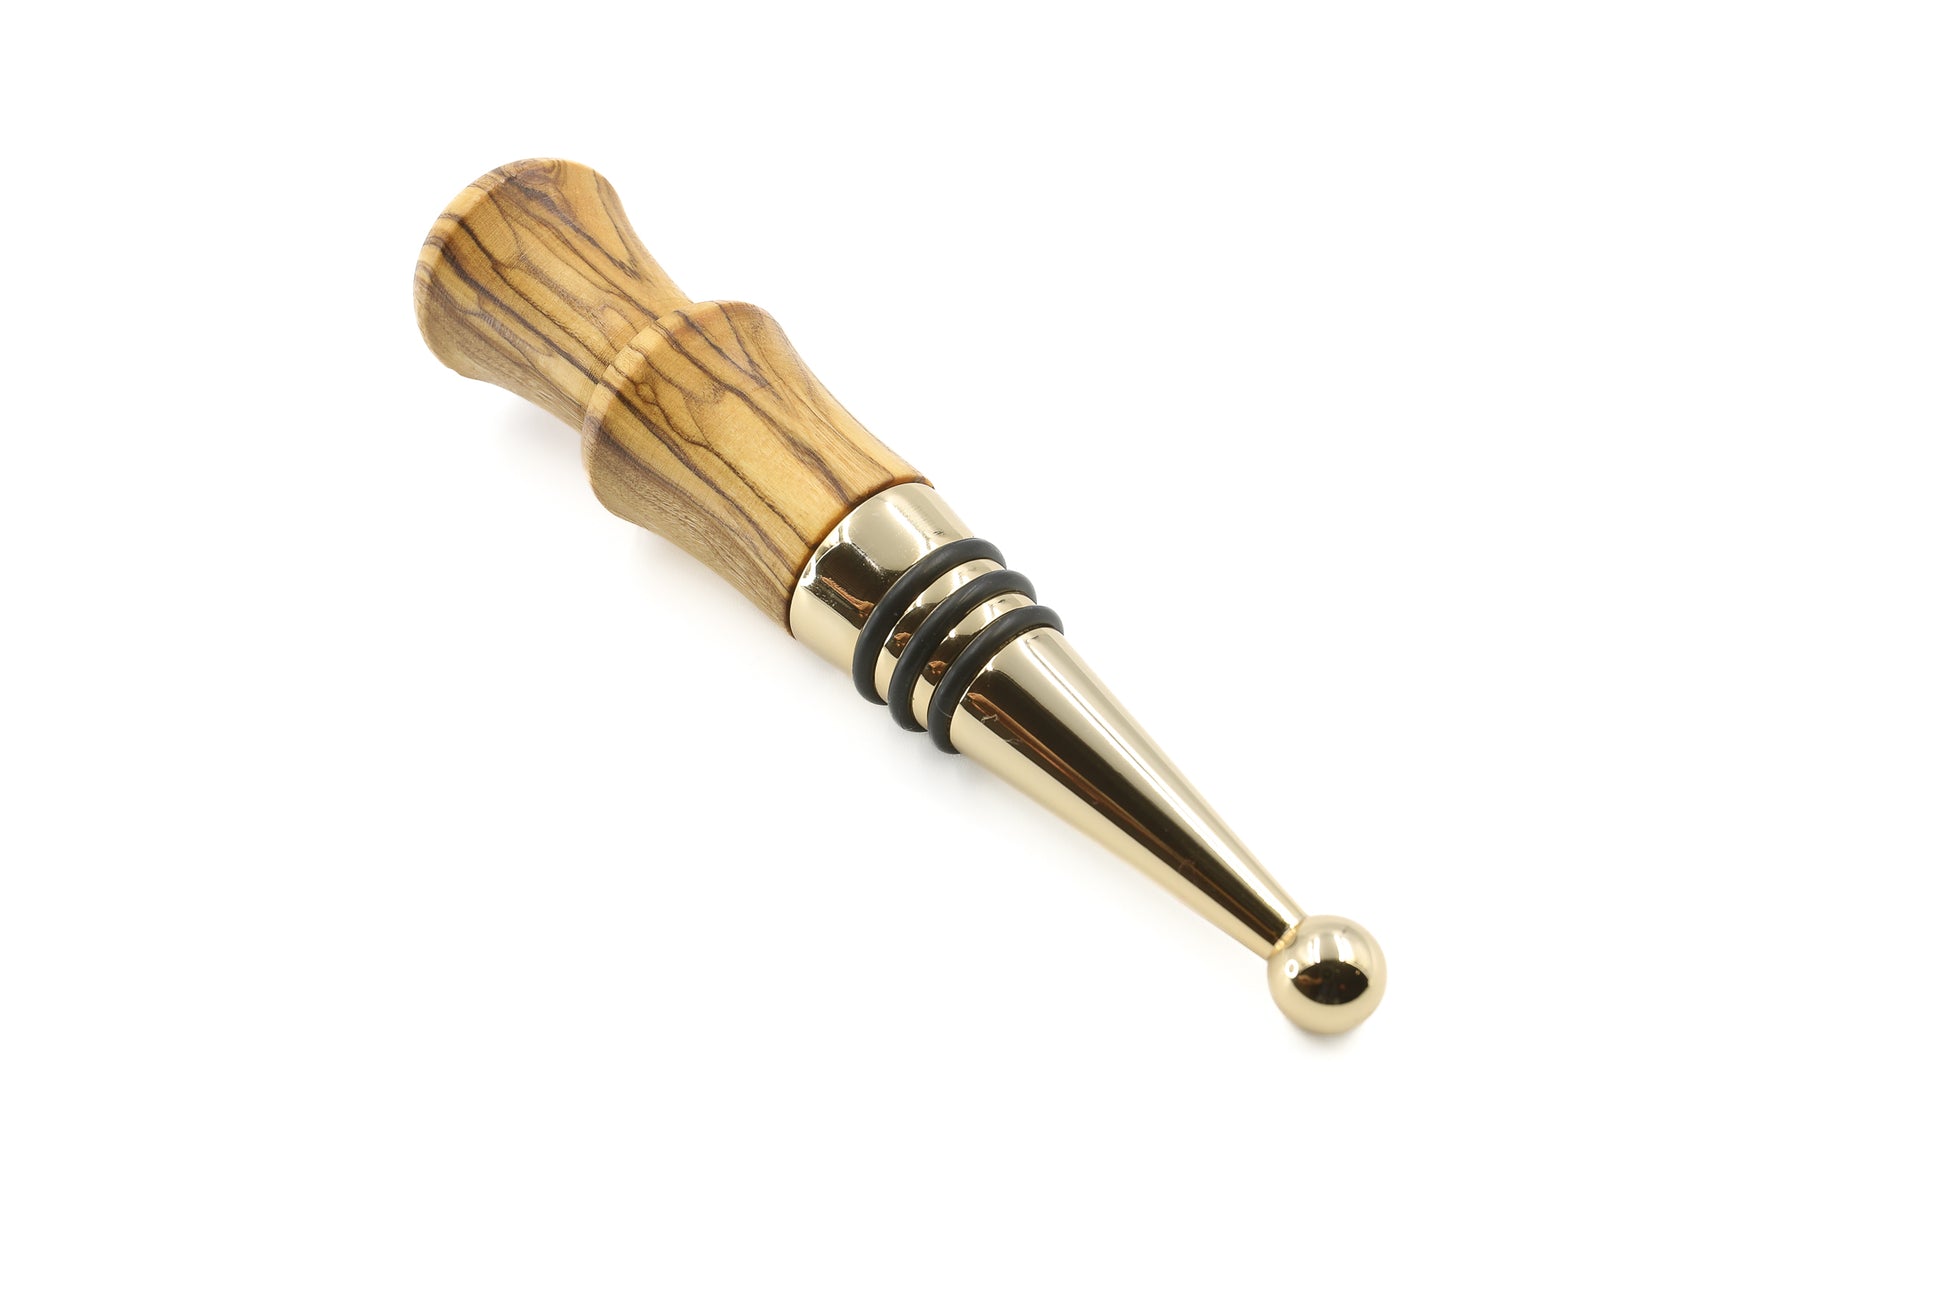 Distinctive olive wood cork stopper for wine enthusiasts